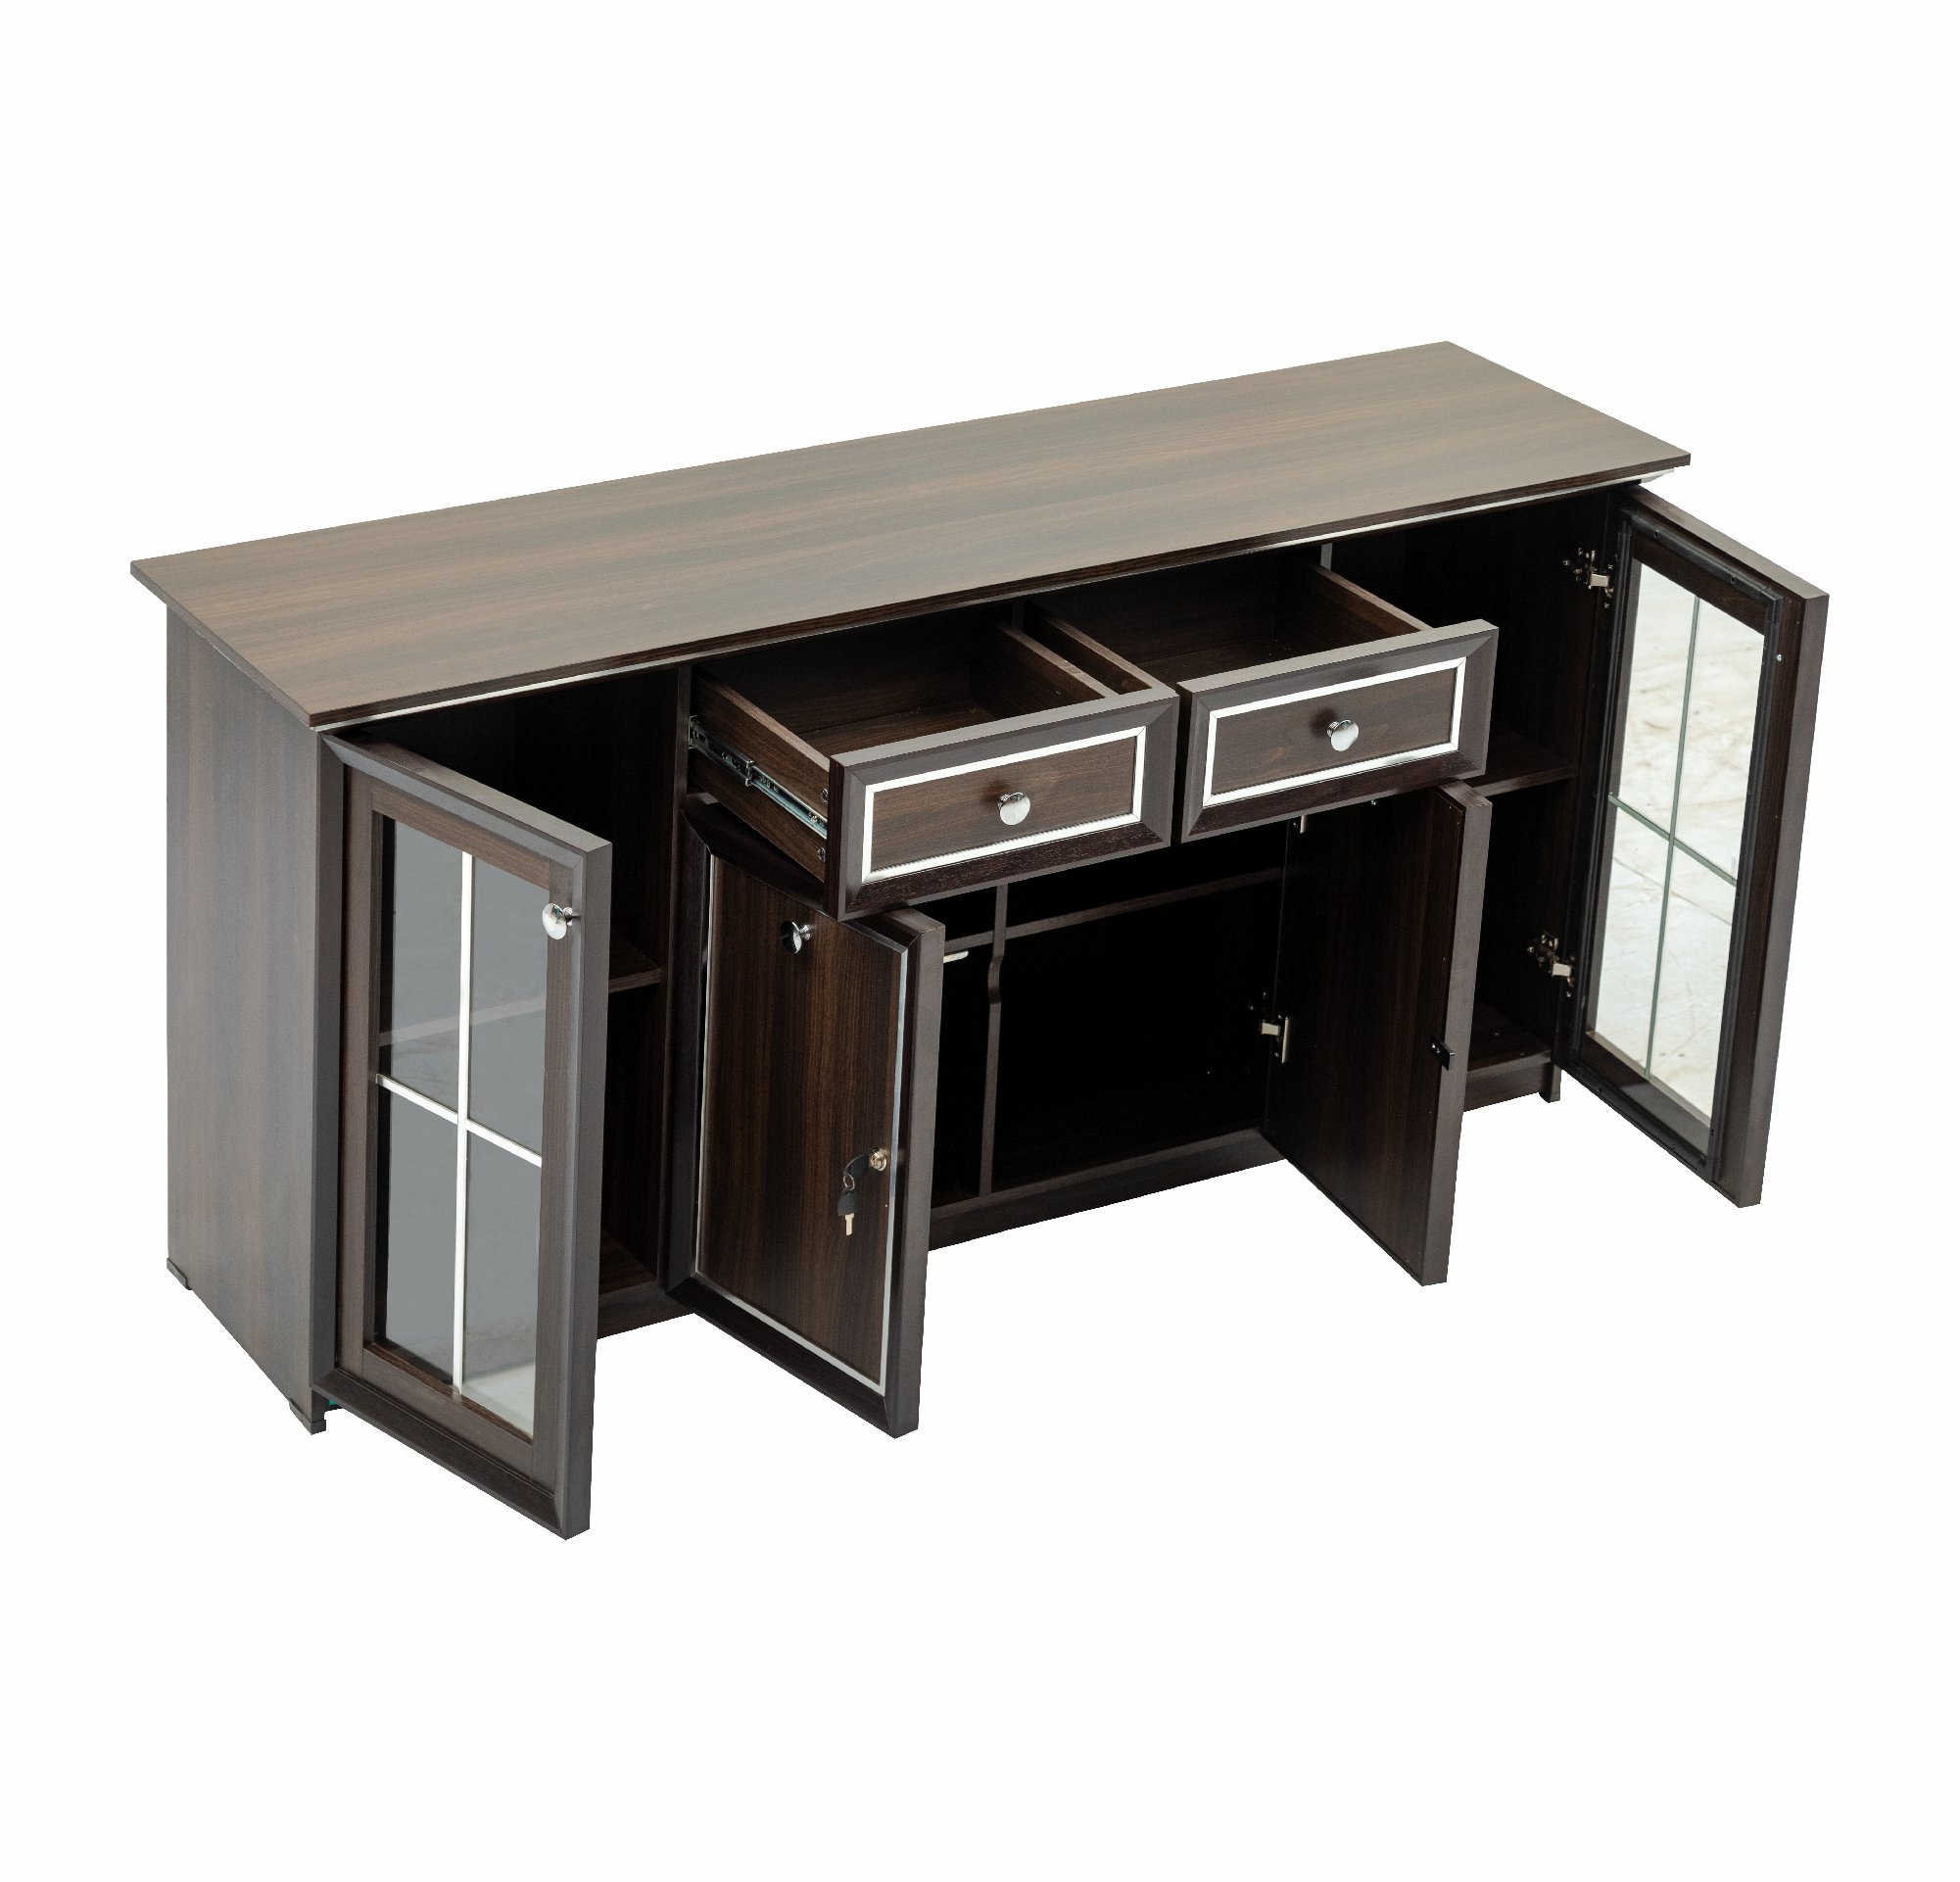 KDC009-Dining Cabinet With 2 Drawers-M42